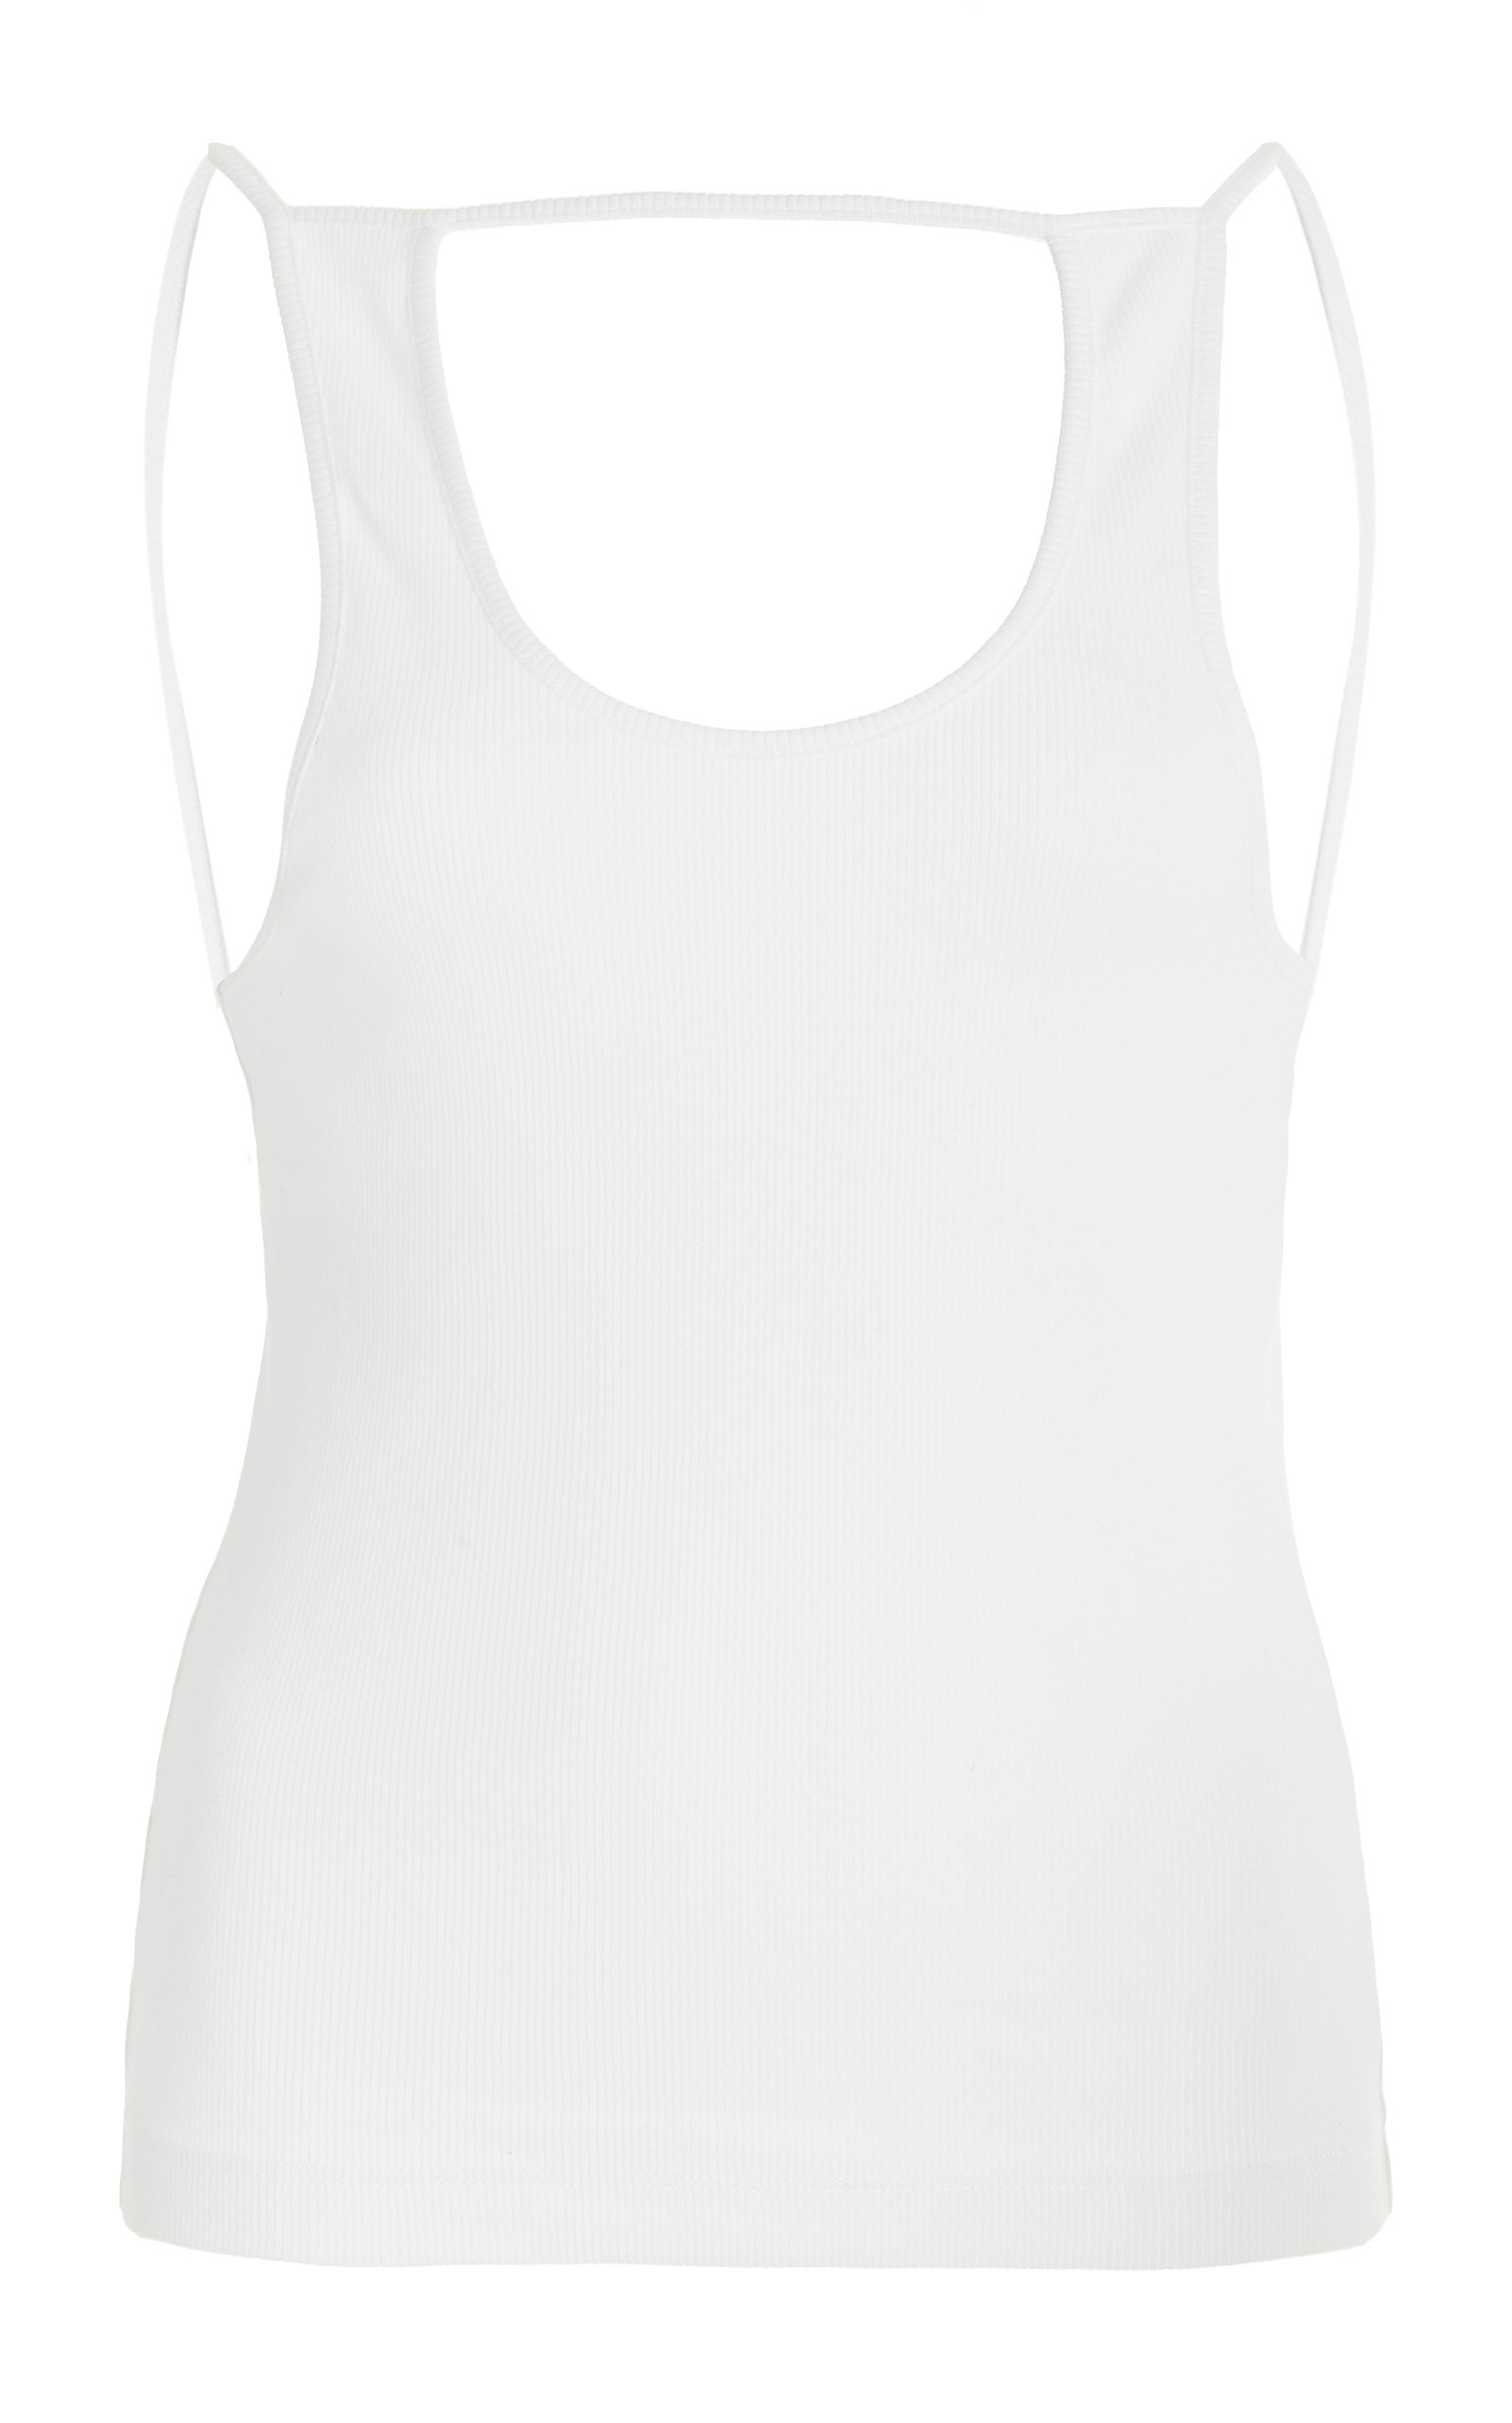 K.ngsley Women's Ian Ribbed Cotton Jersey Tank Top